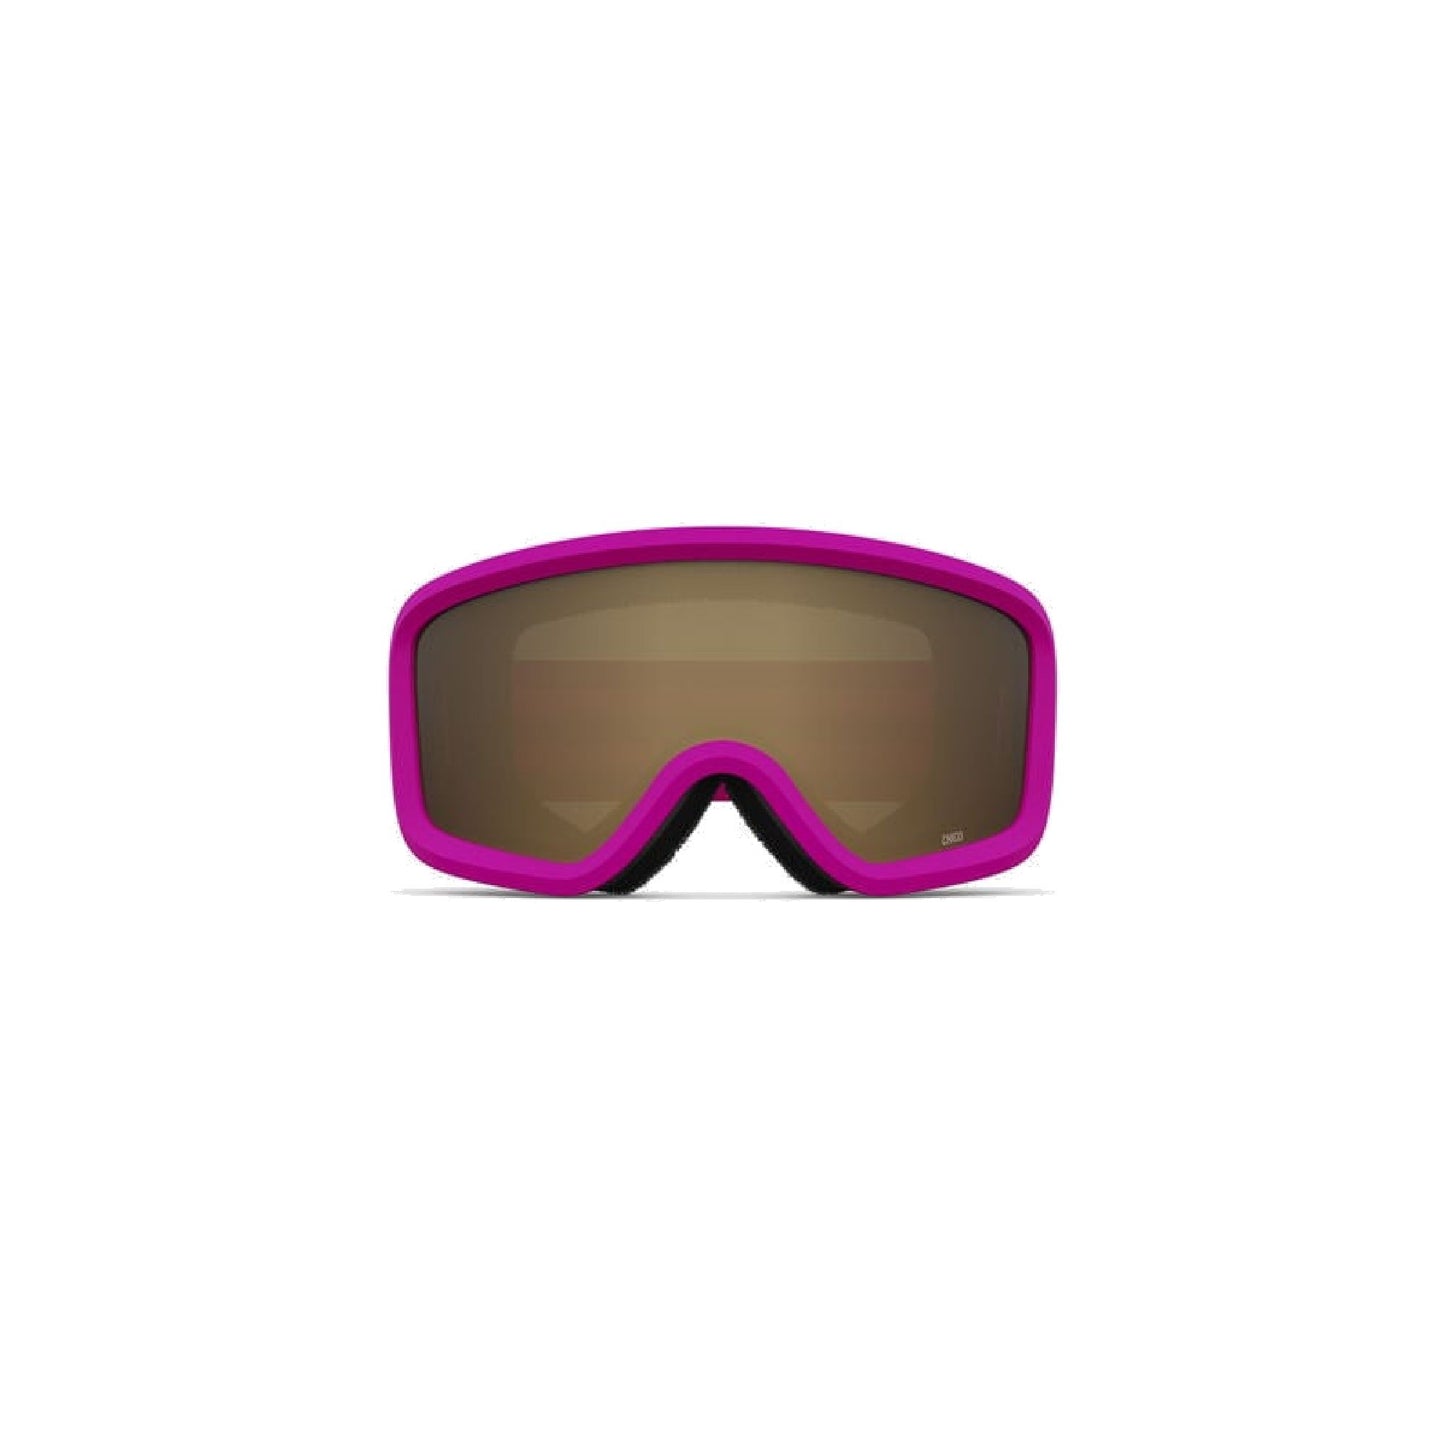 Giro Youth Chico 2.0 Snow Goggles Pink Geo Camo Amber Rose Snow Goggles